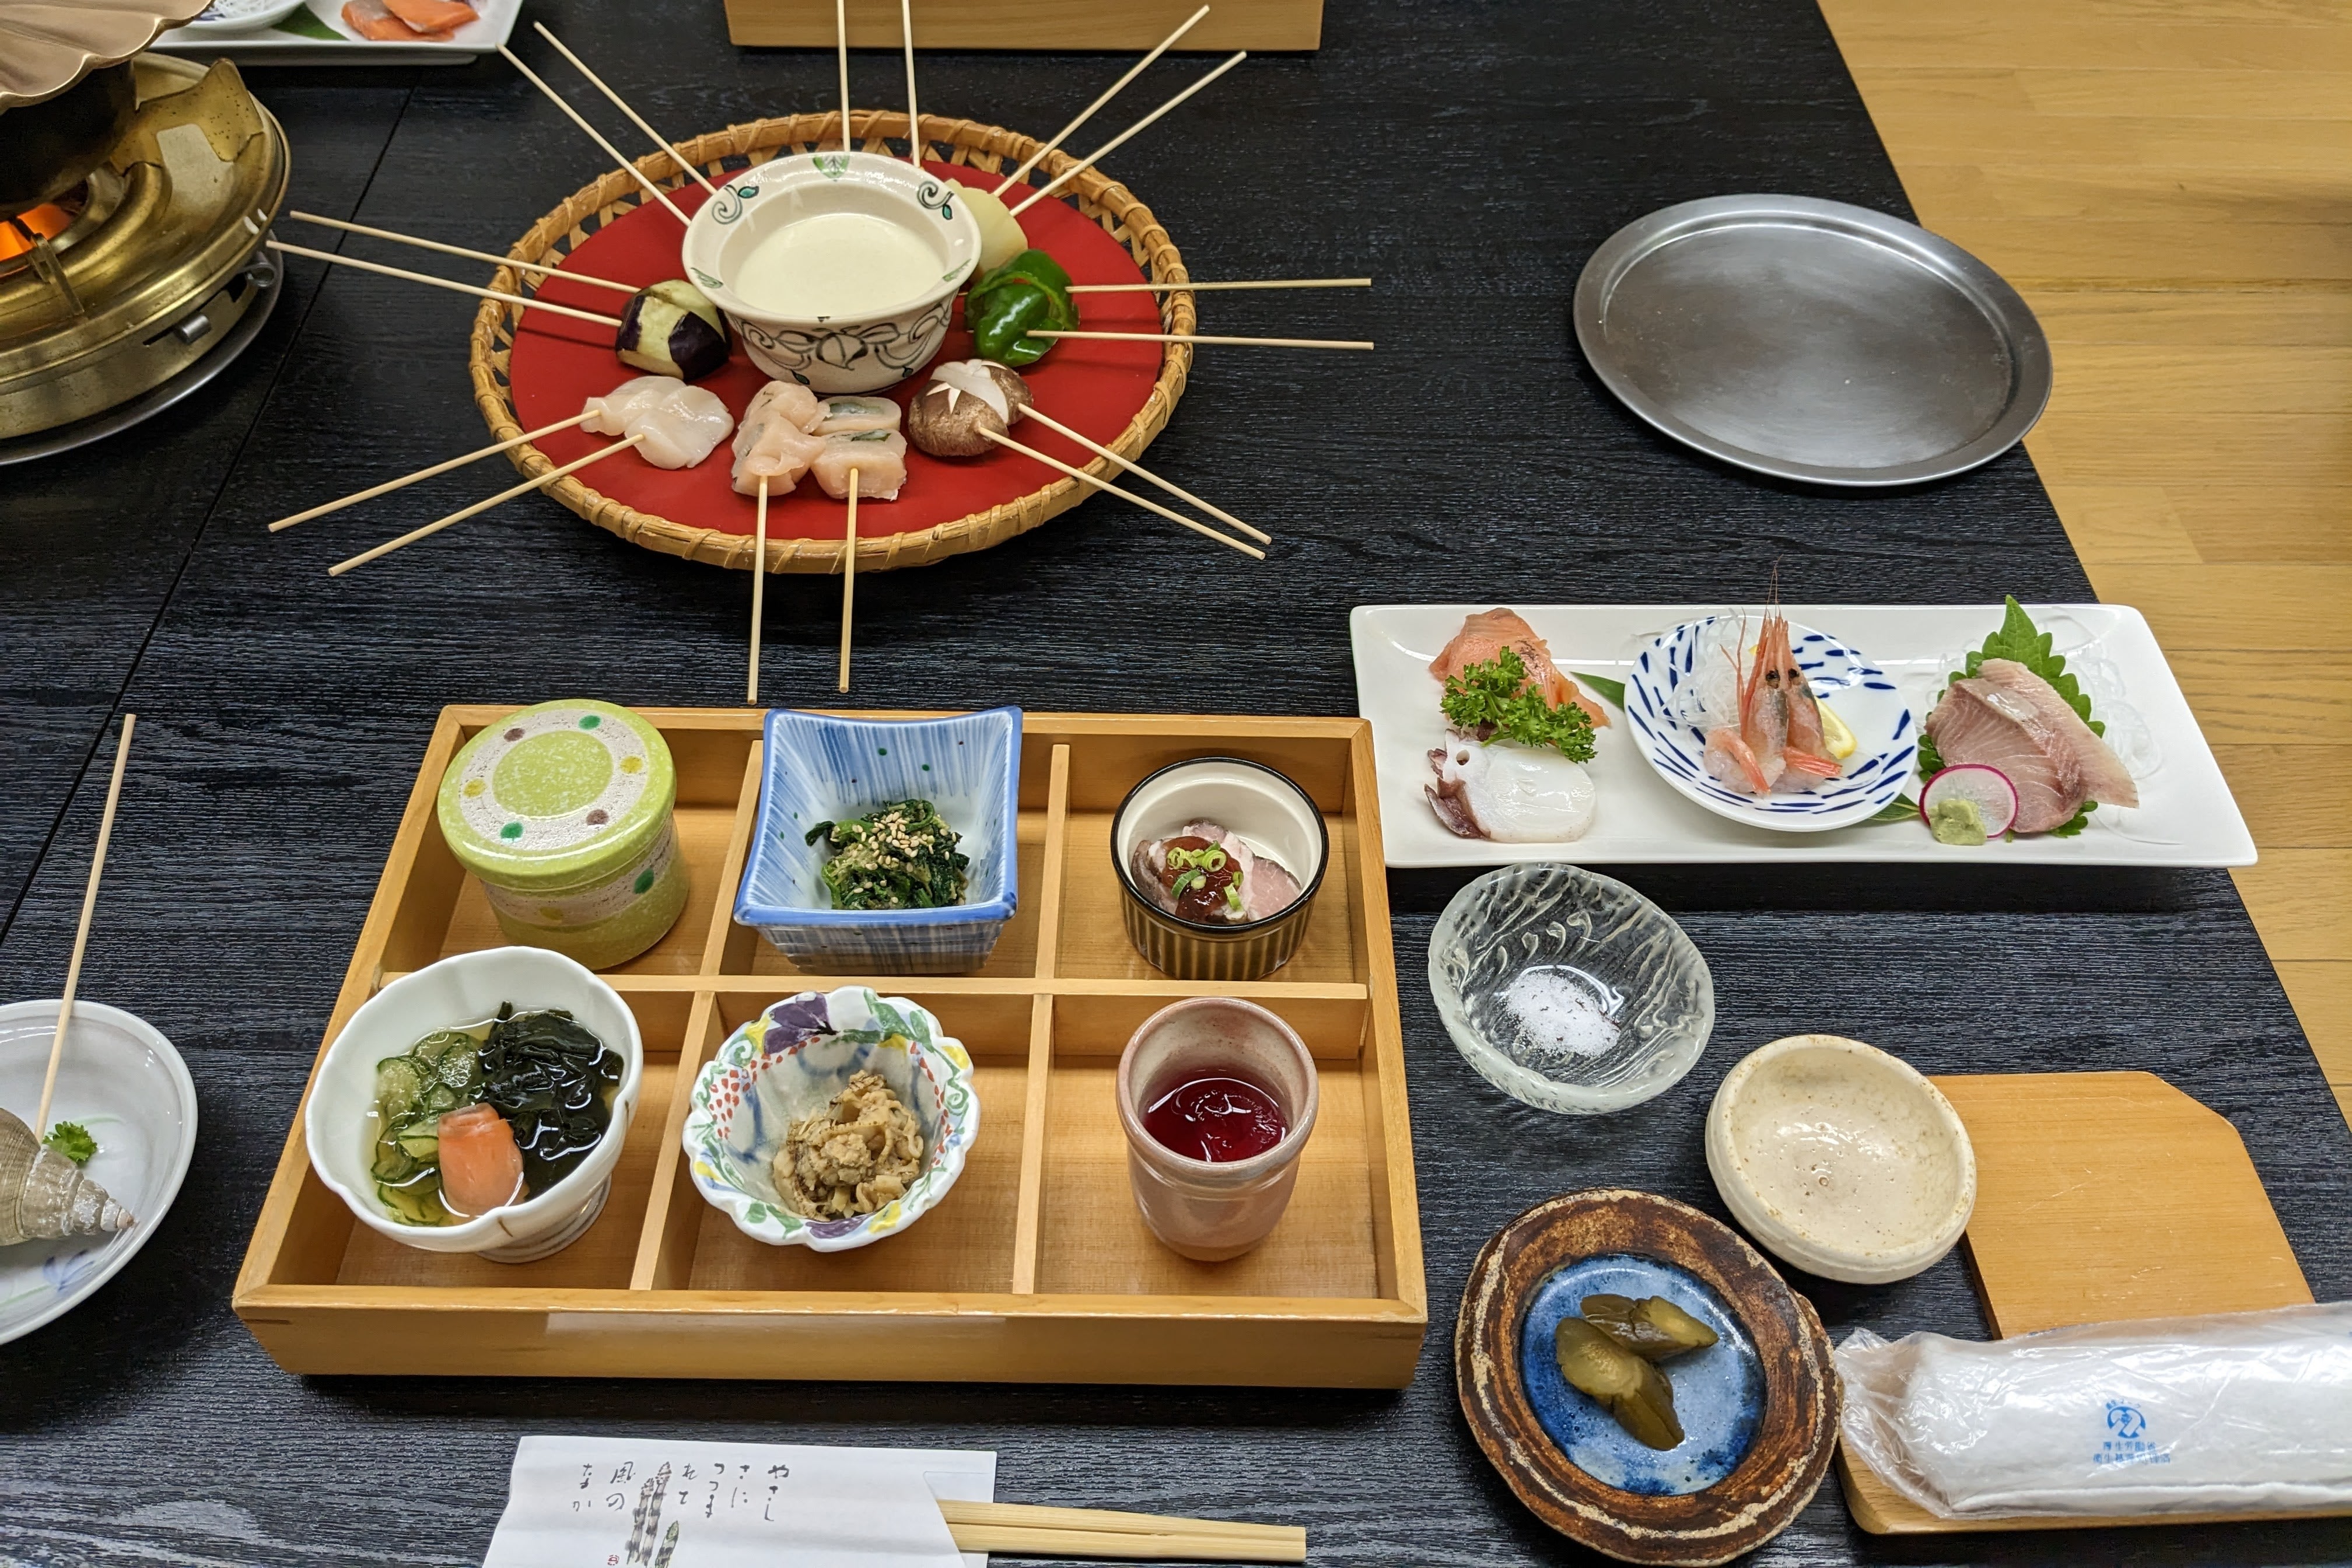 A Japanese "kaiseki" meal, featuring many small and varied dishes spread across a table.